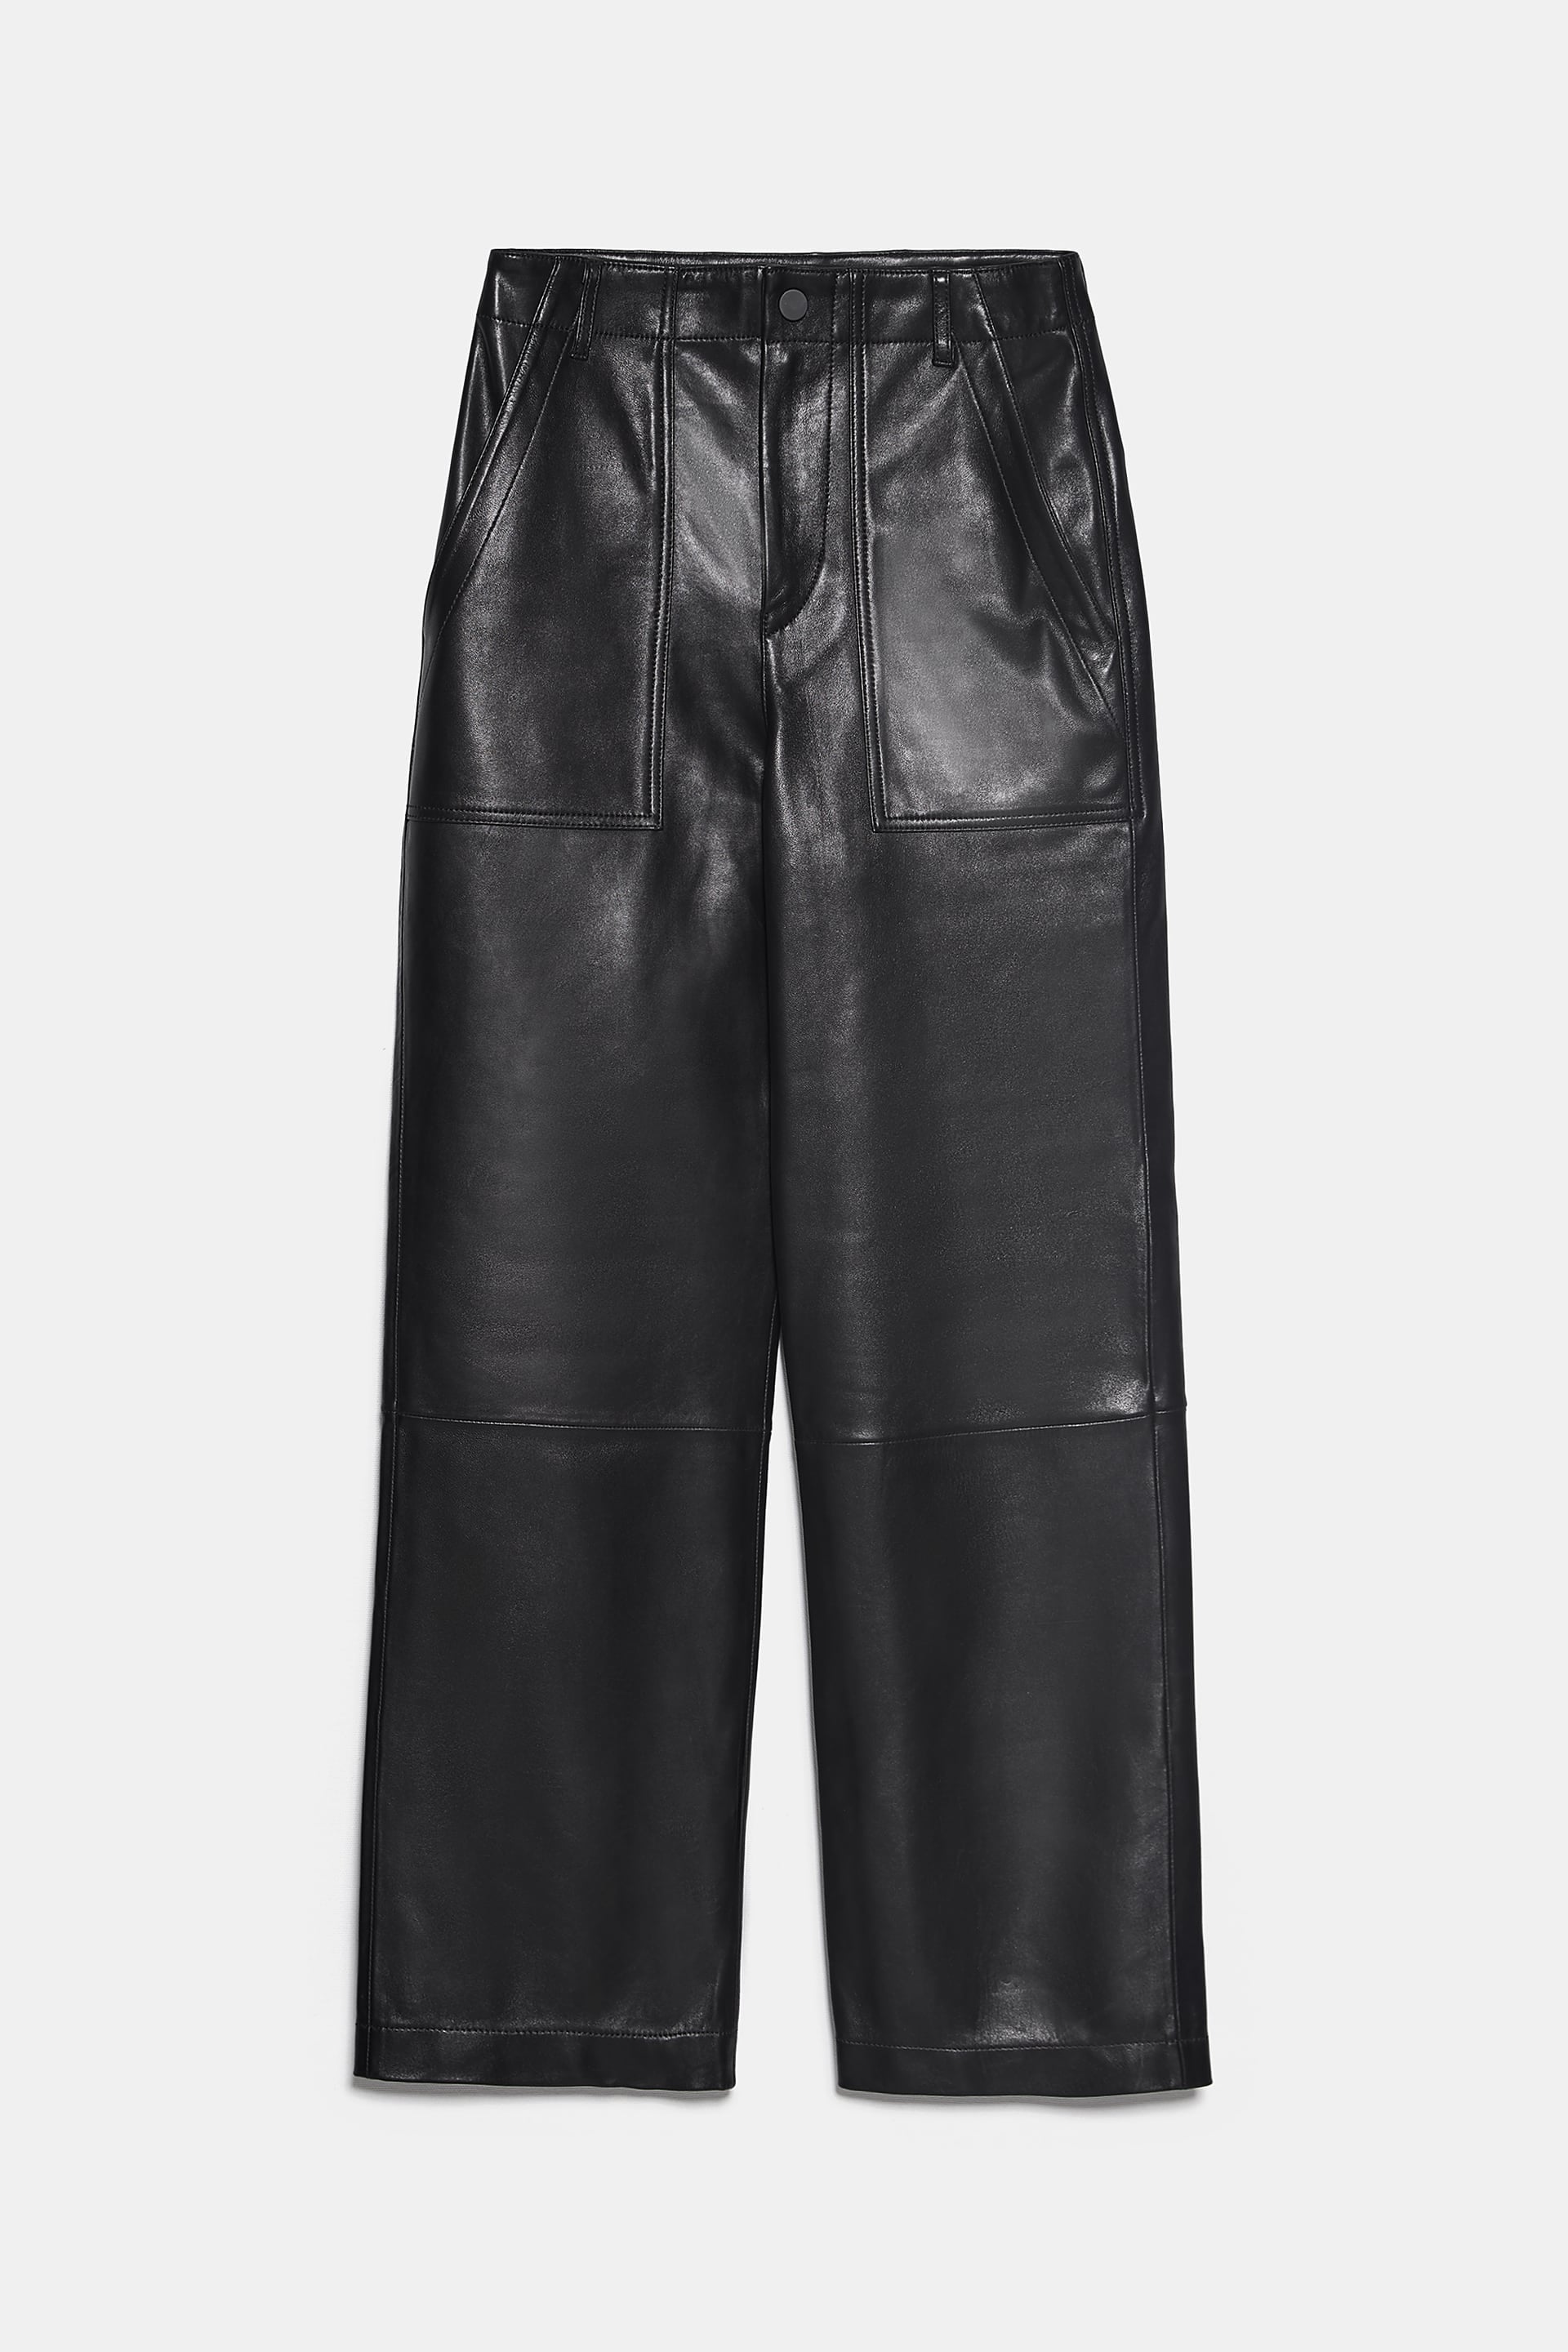 Zara Leather Pants  Monochrome Outfits Are Always a Good Idea